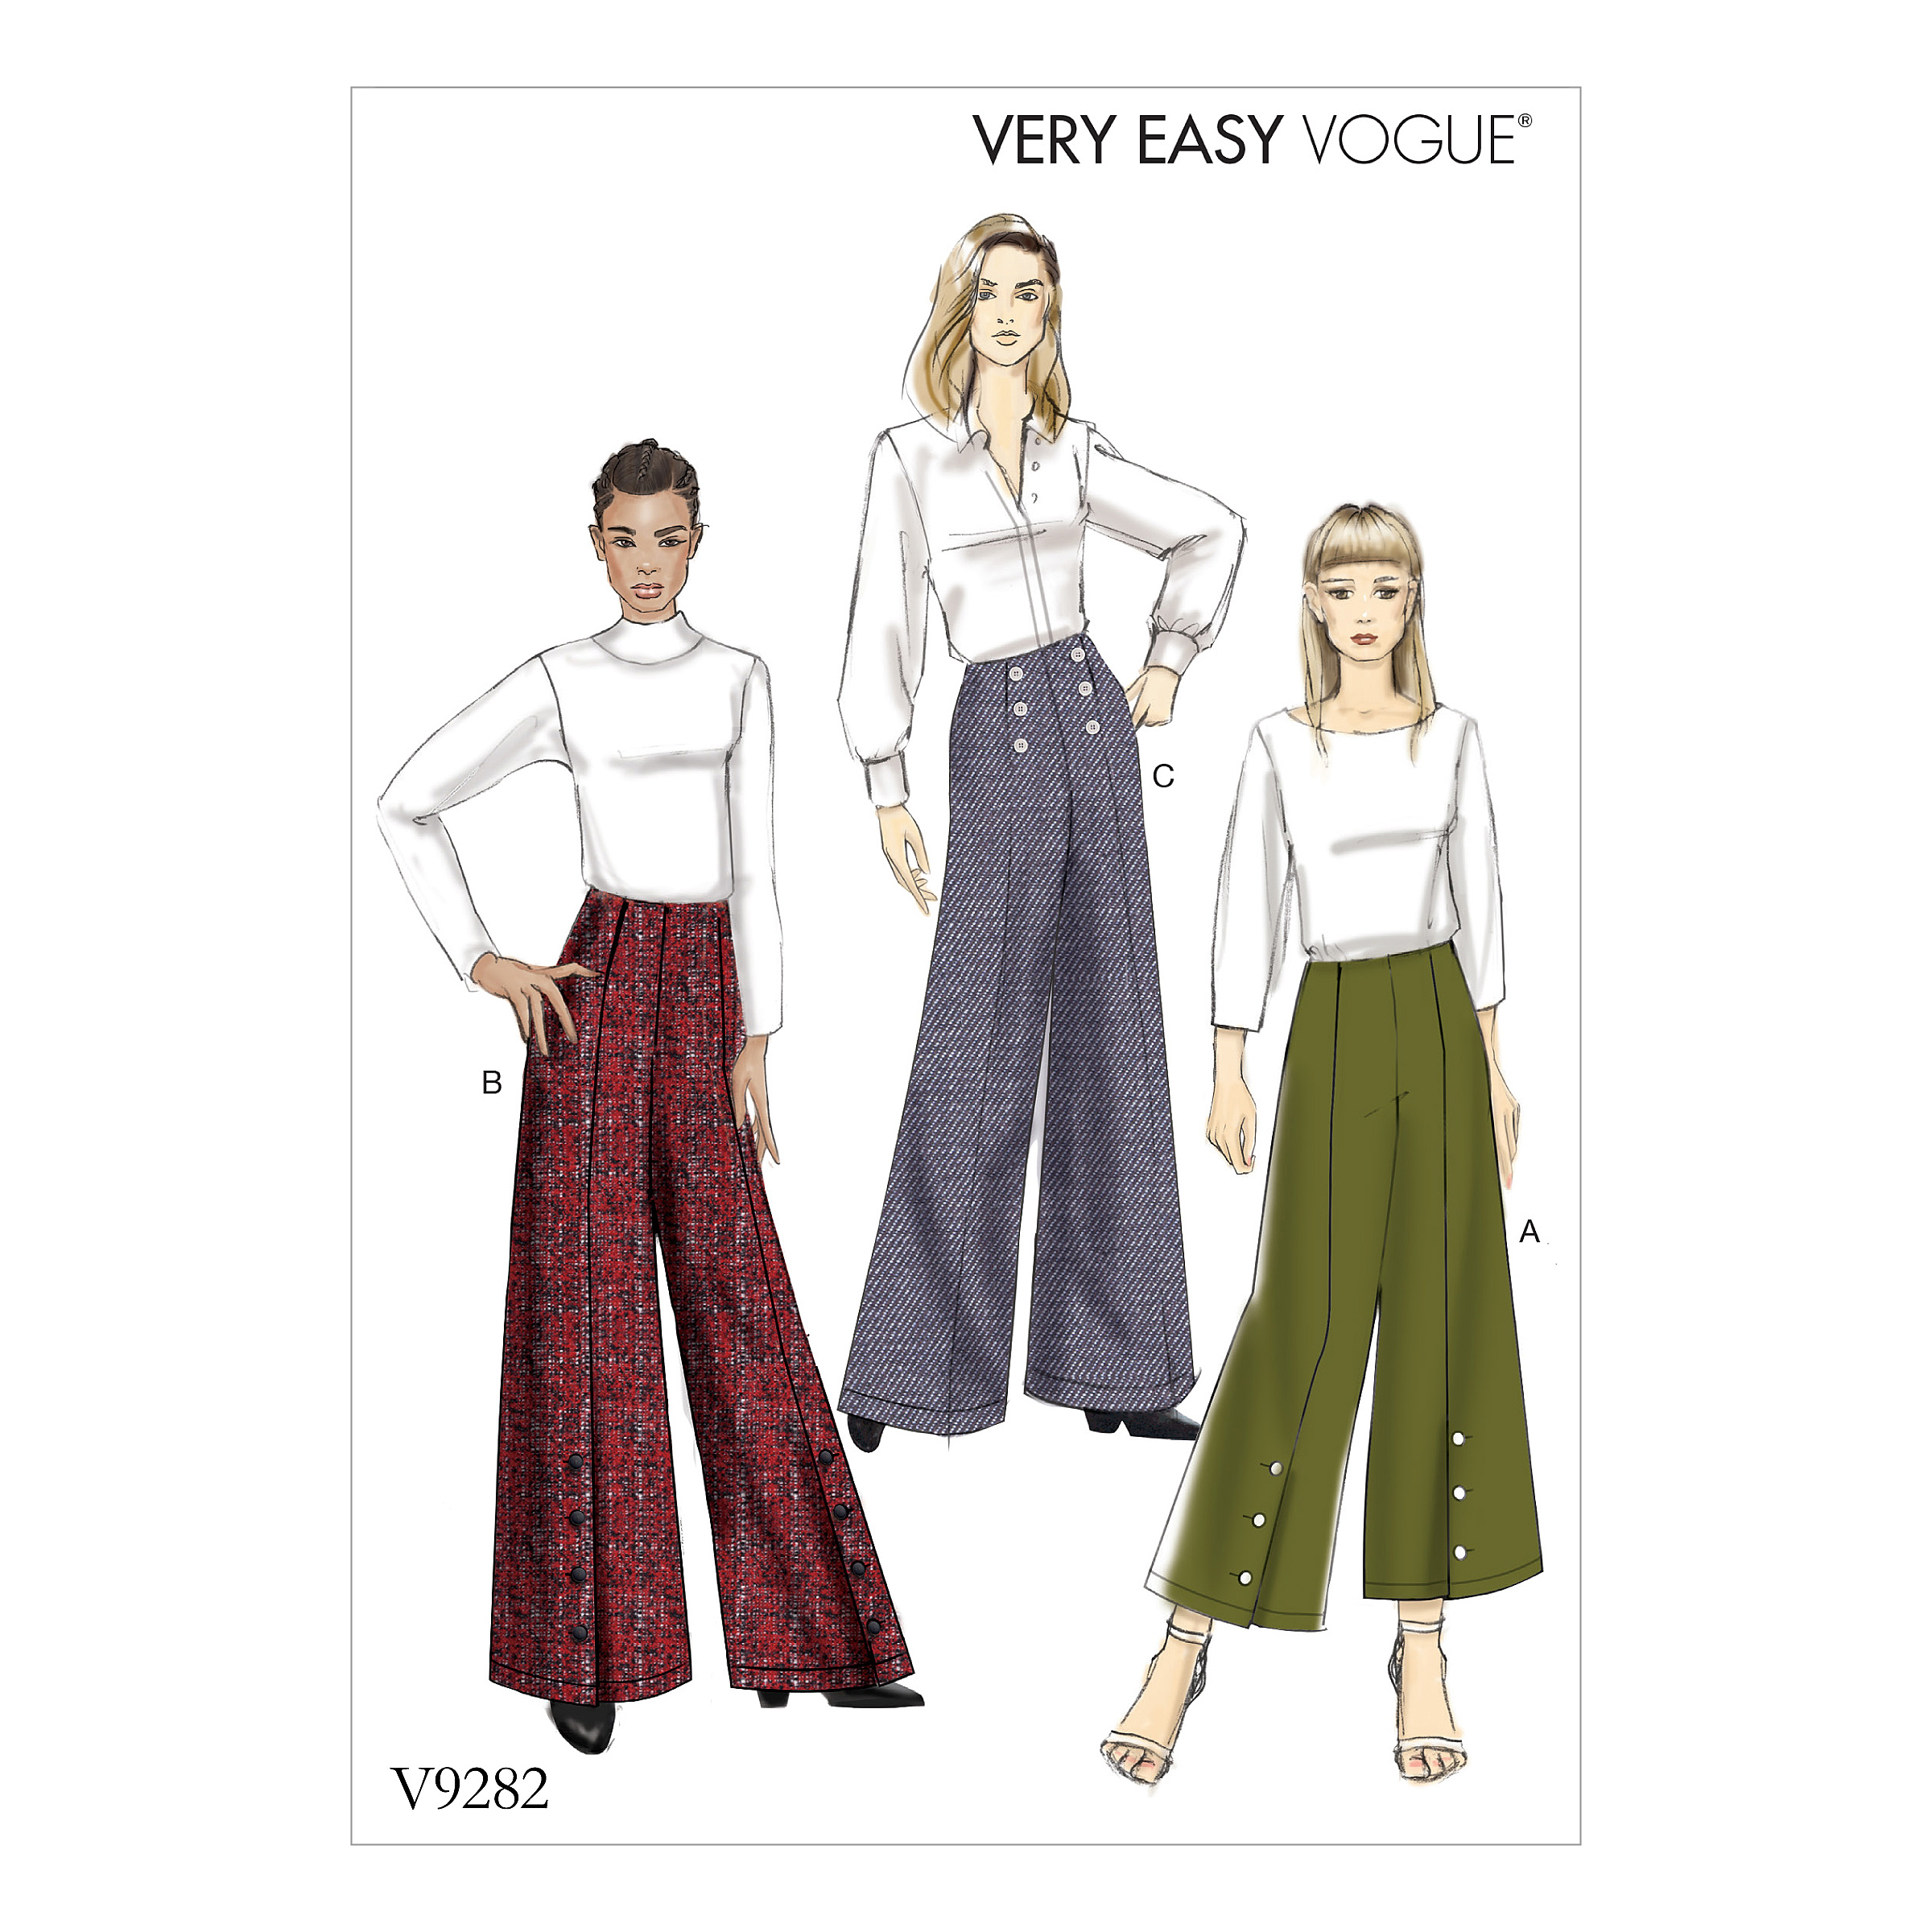 https://images.patternreview.com/sewing/patterns/vogue/2017/9282/9282.jpg